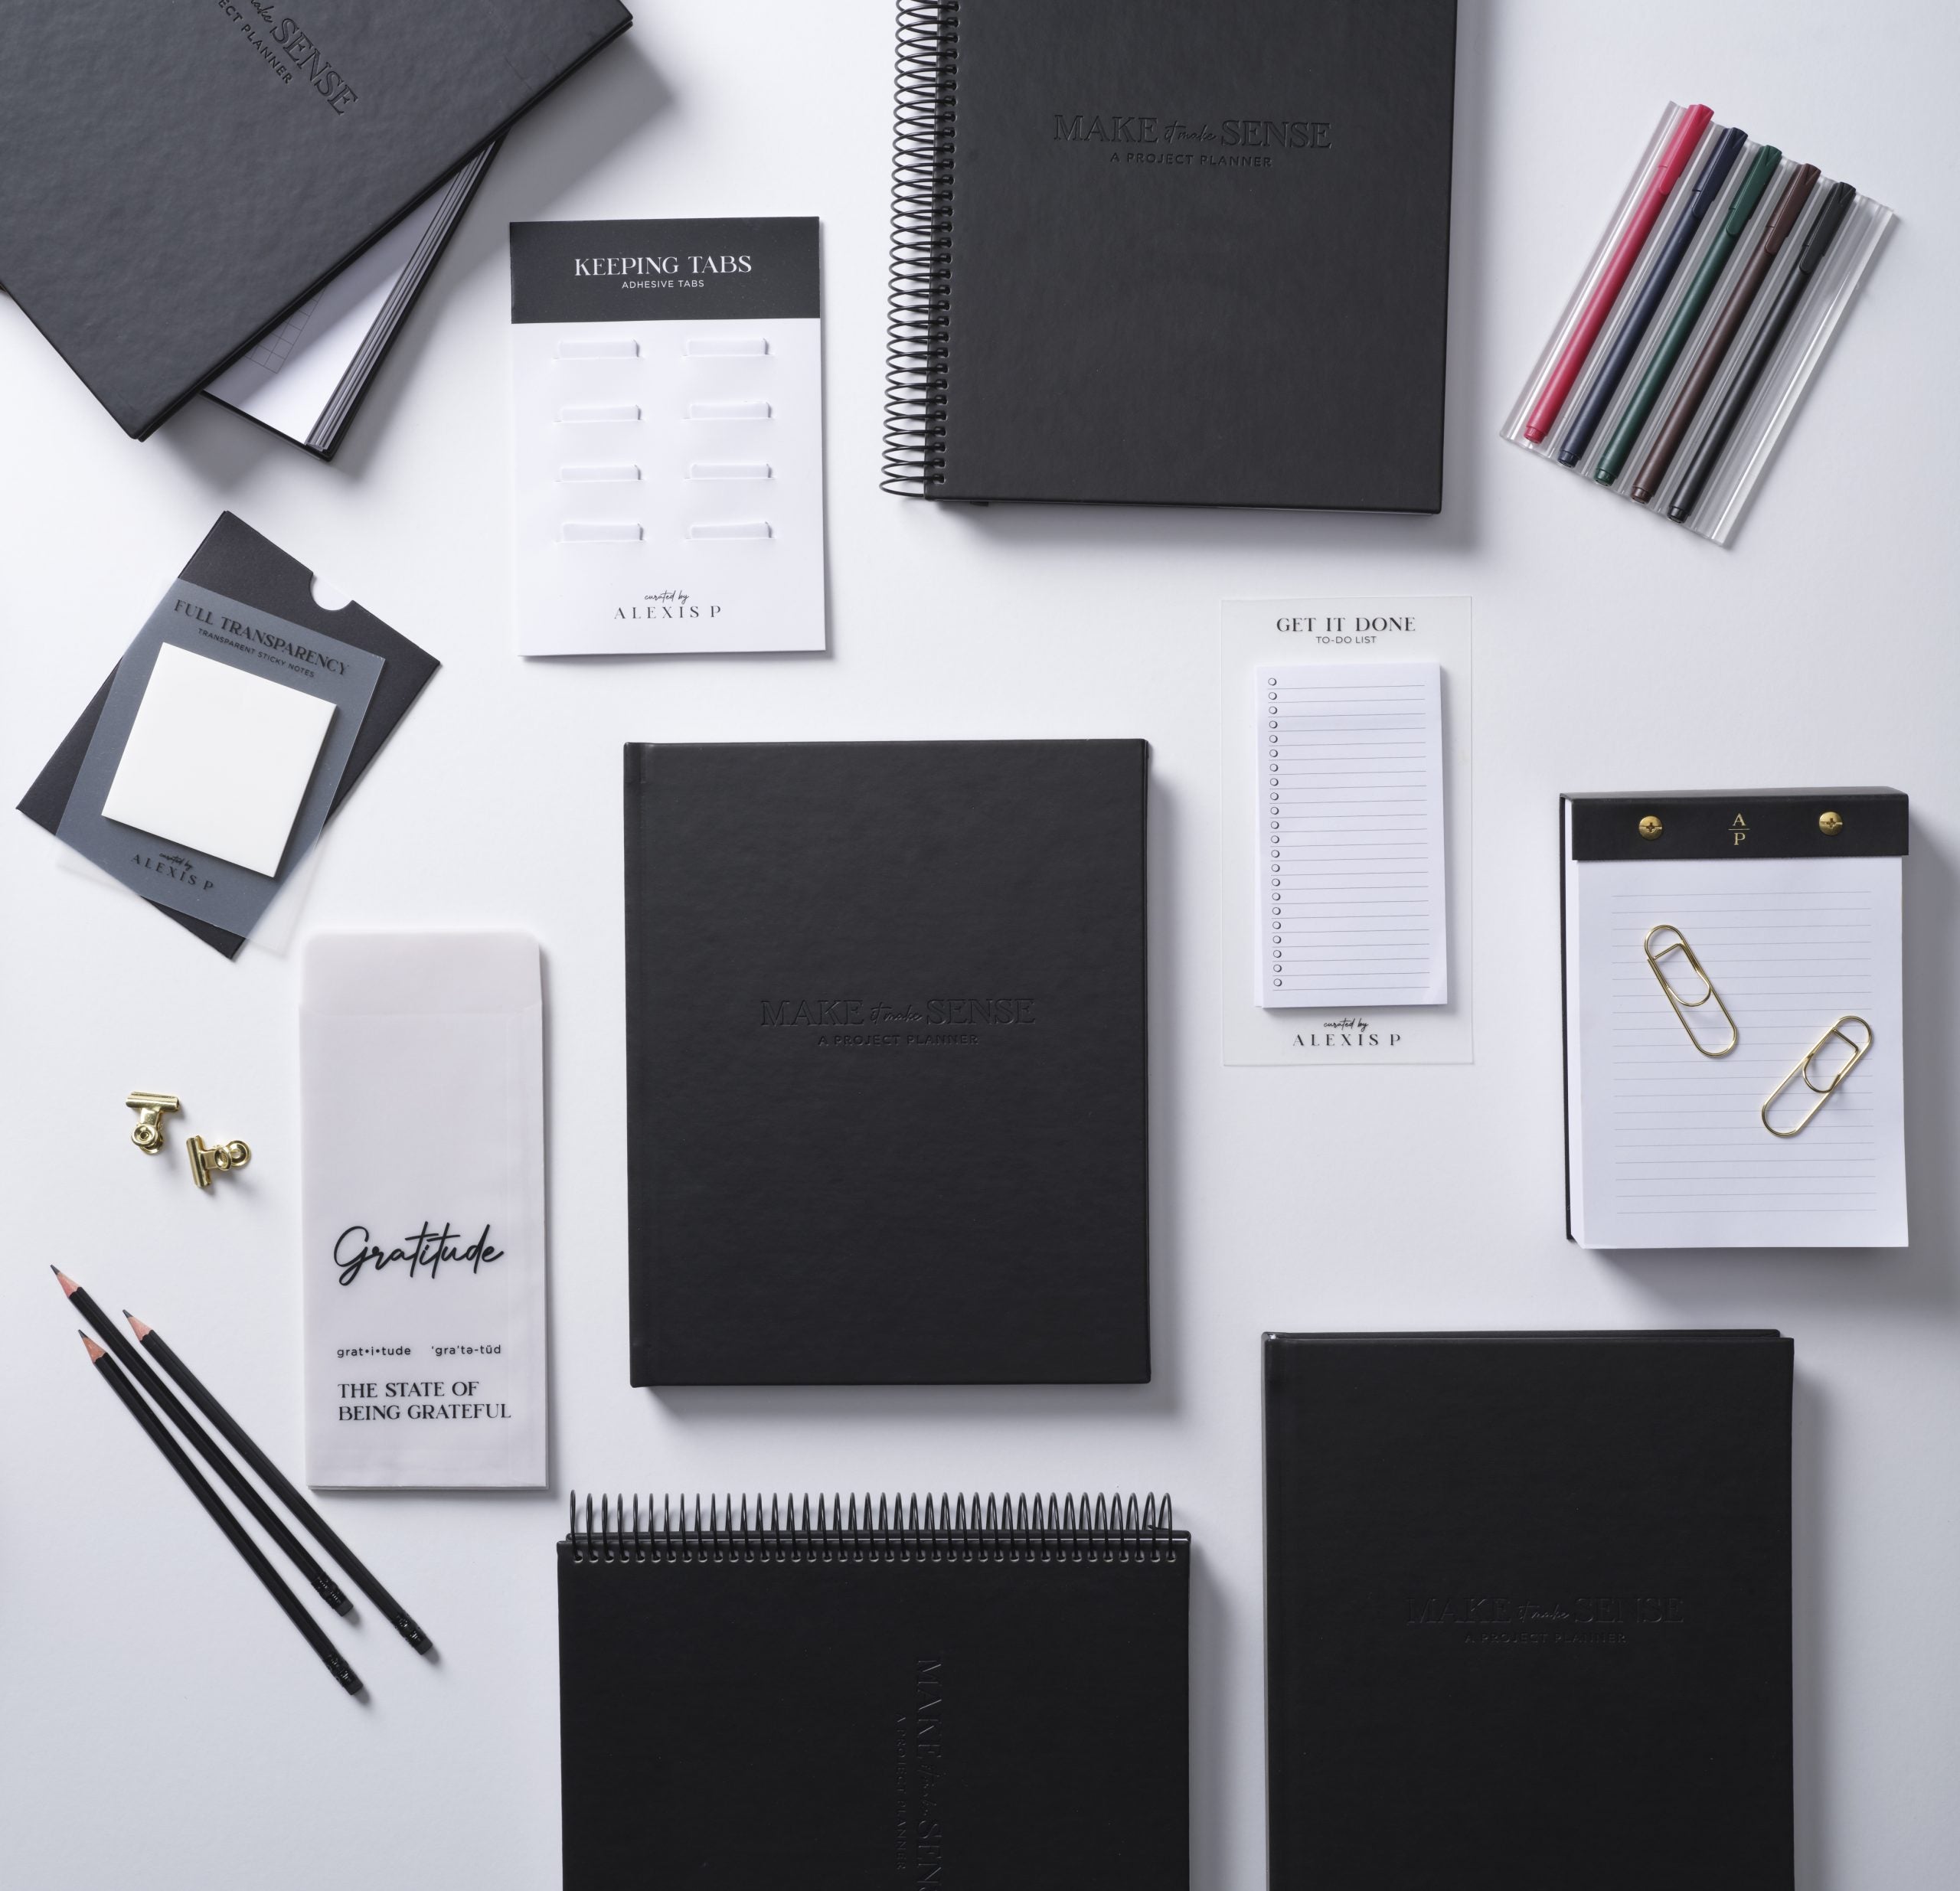 Jada Paul Launched A Productivity Tool Brand To Help The Ambitious Mindfully Manage Their Lives